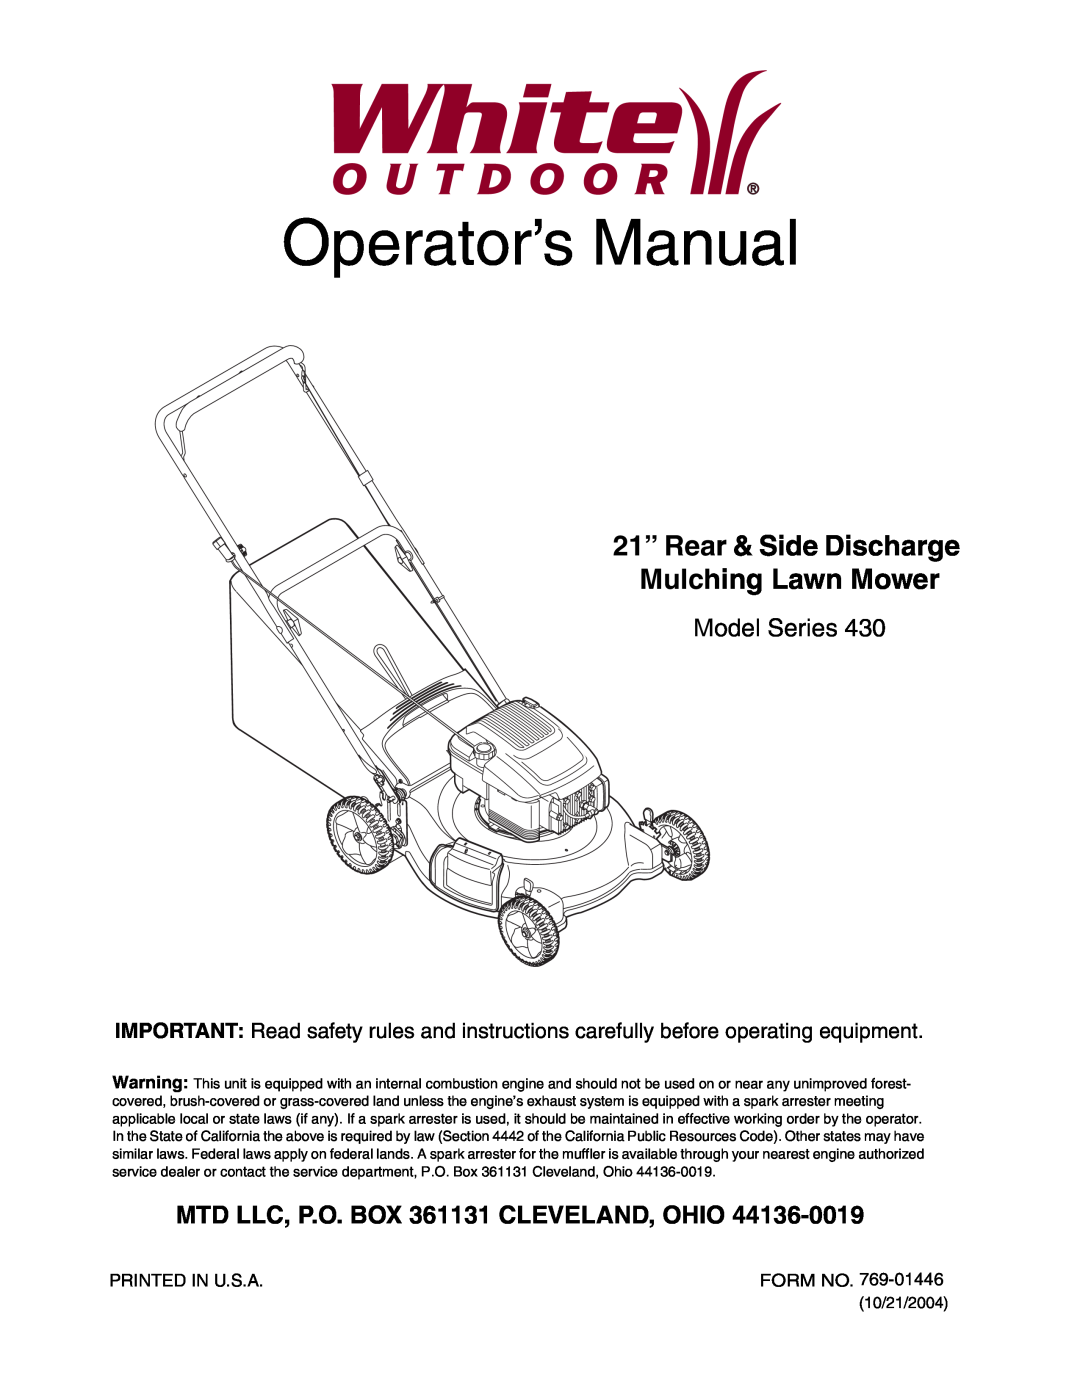 White Outdoor 430 manual Operator’s Manual, 21” Rear & Side Discharge Mulching Lawn Mower, Model Series 